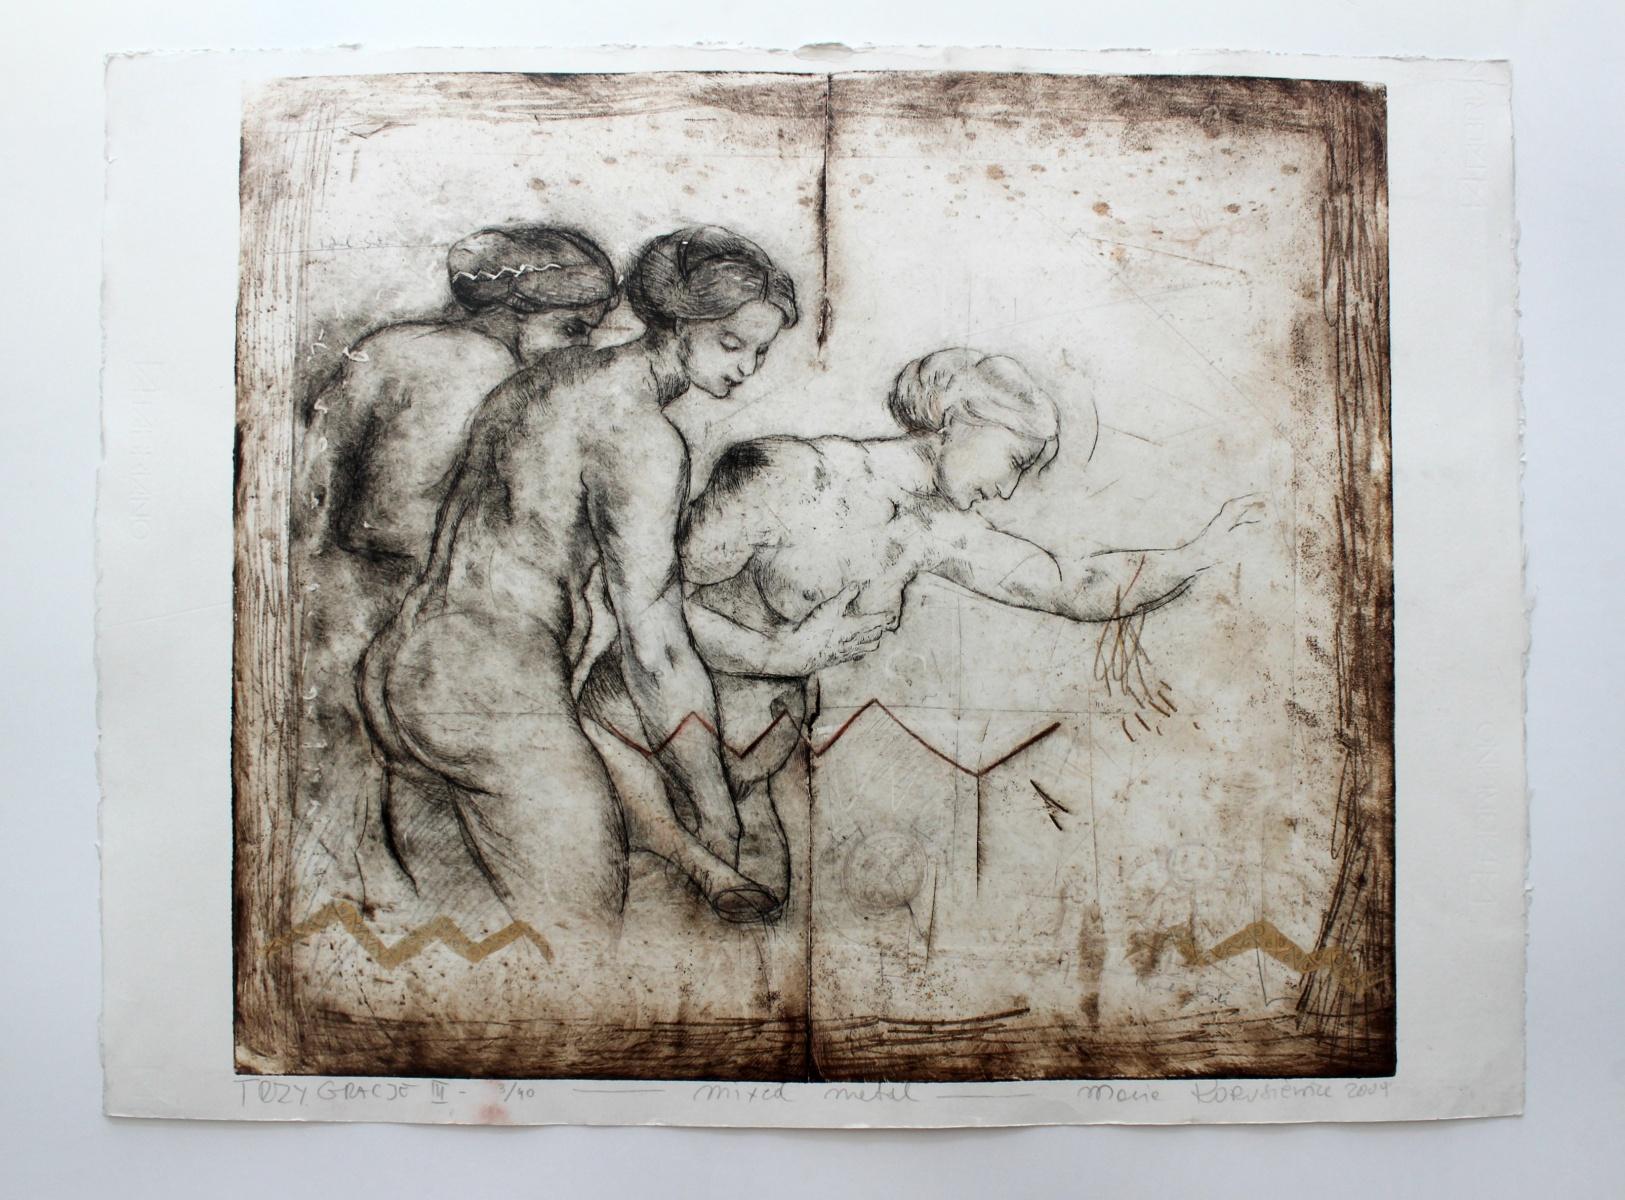 The Three Graces - Contemporary art, Figurative print, Old masters inspired - Print by Maria Korusiewicz